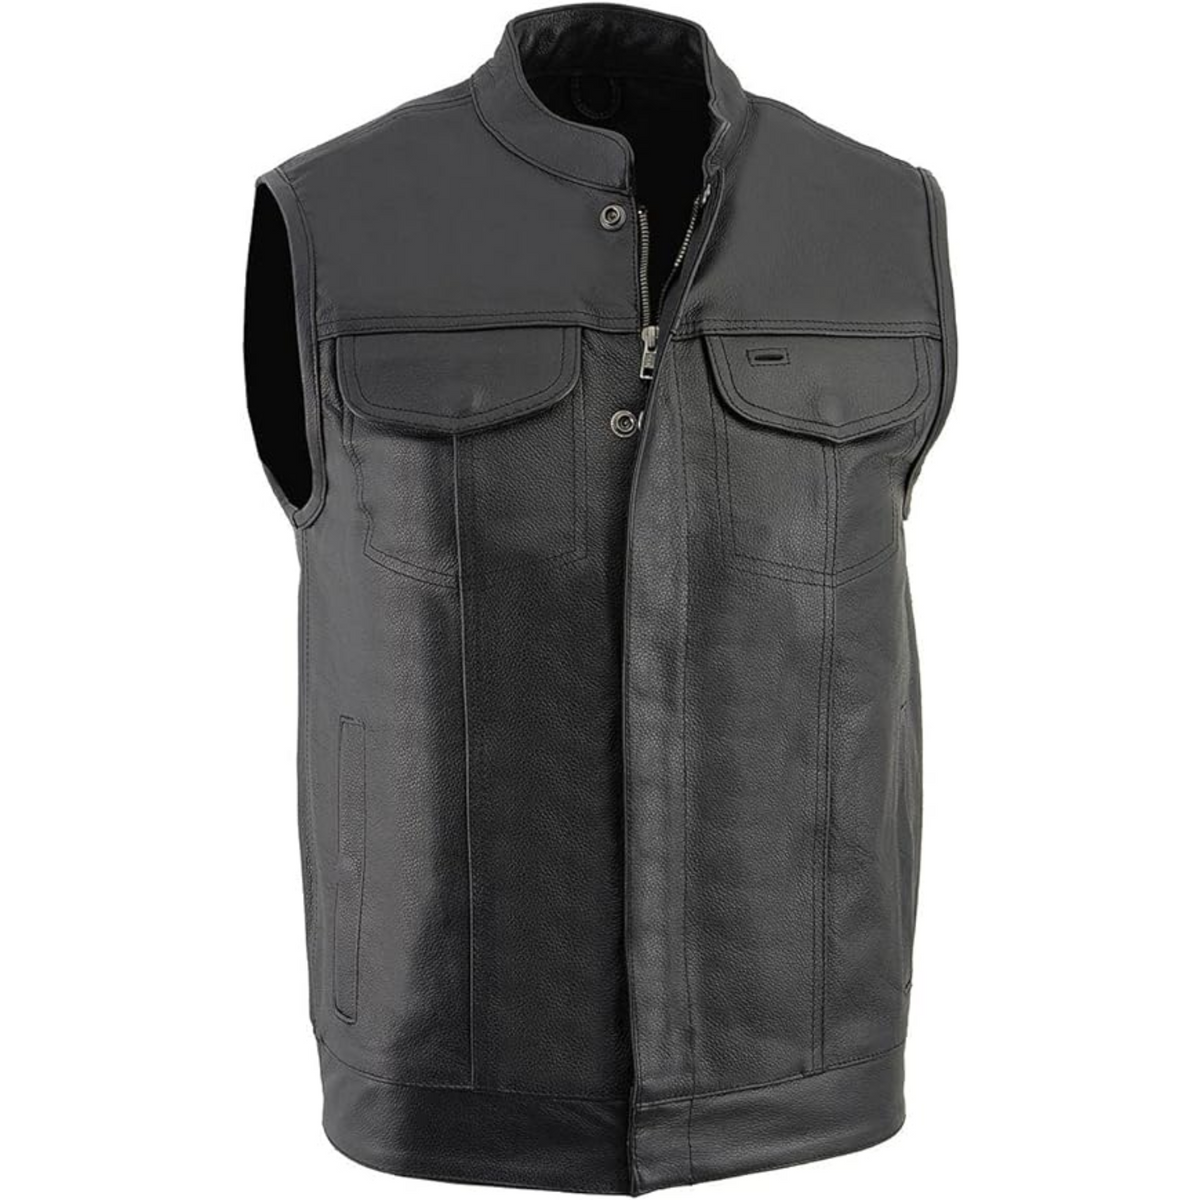 Exclusive Motorbike Racers Club Vest High-Quality Gear for Racing Enthusiasts